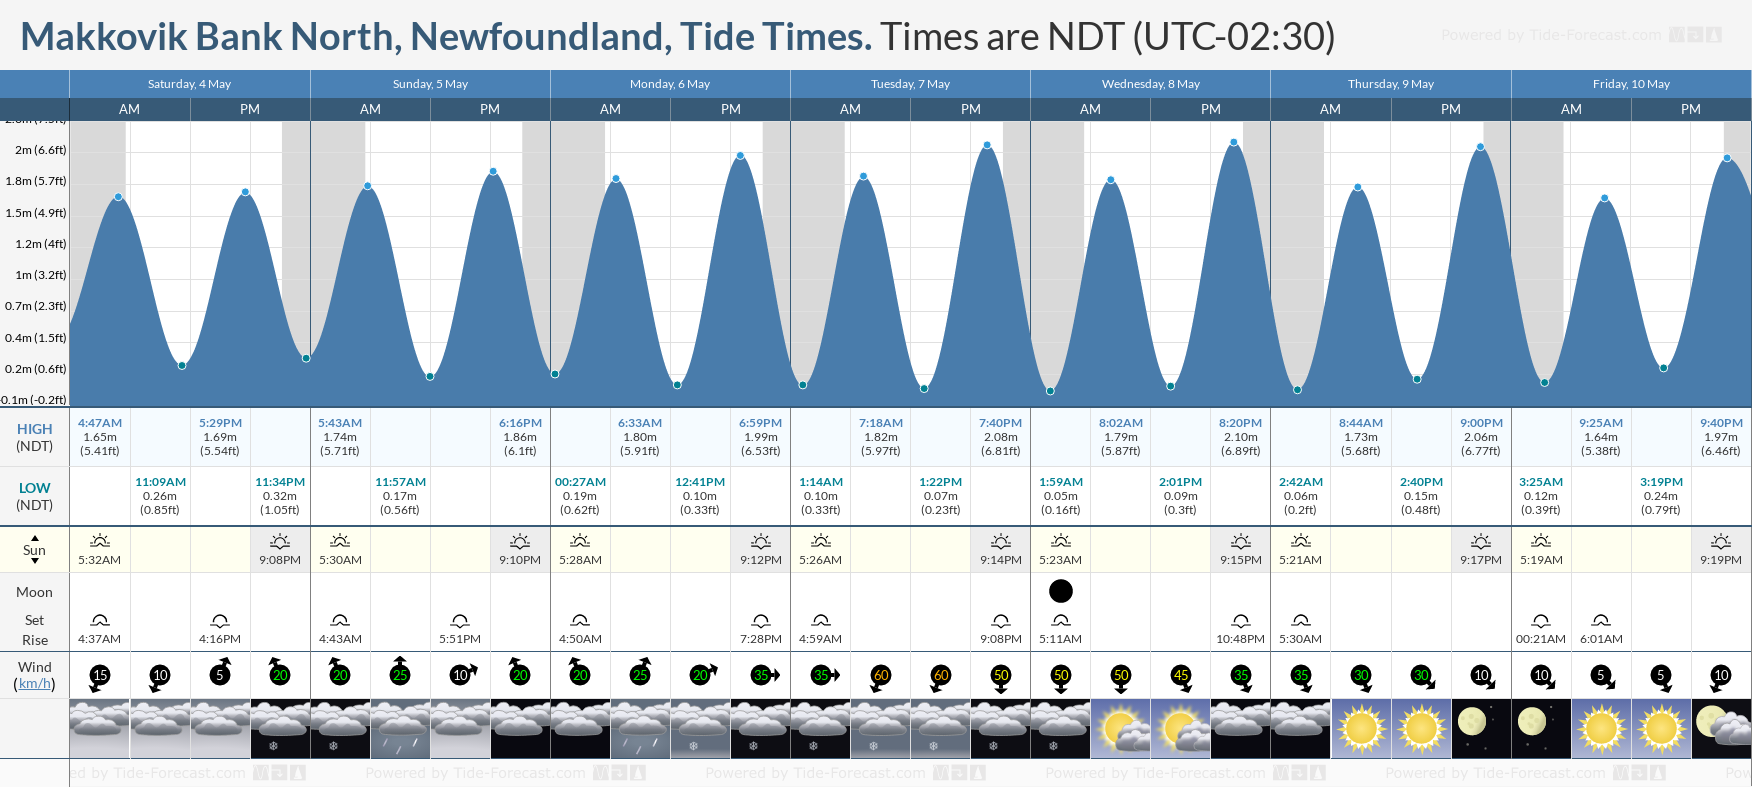 Makkovik Bank North, Newfoundland Tide Chart including high and low tide tide times for the next 7 days